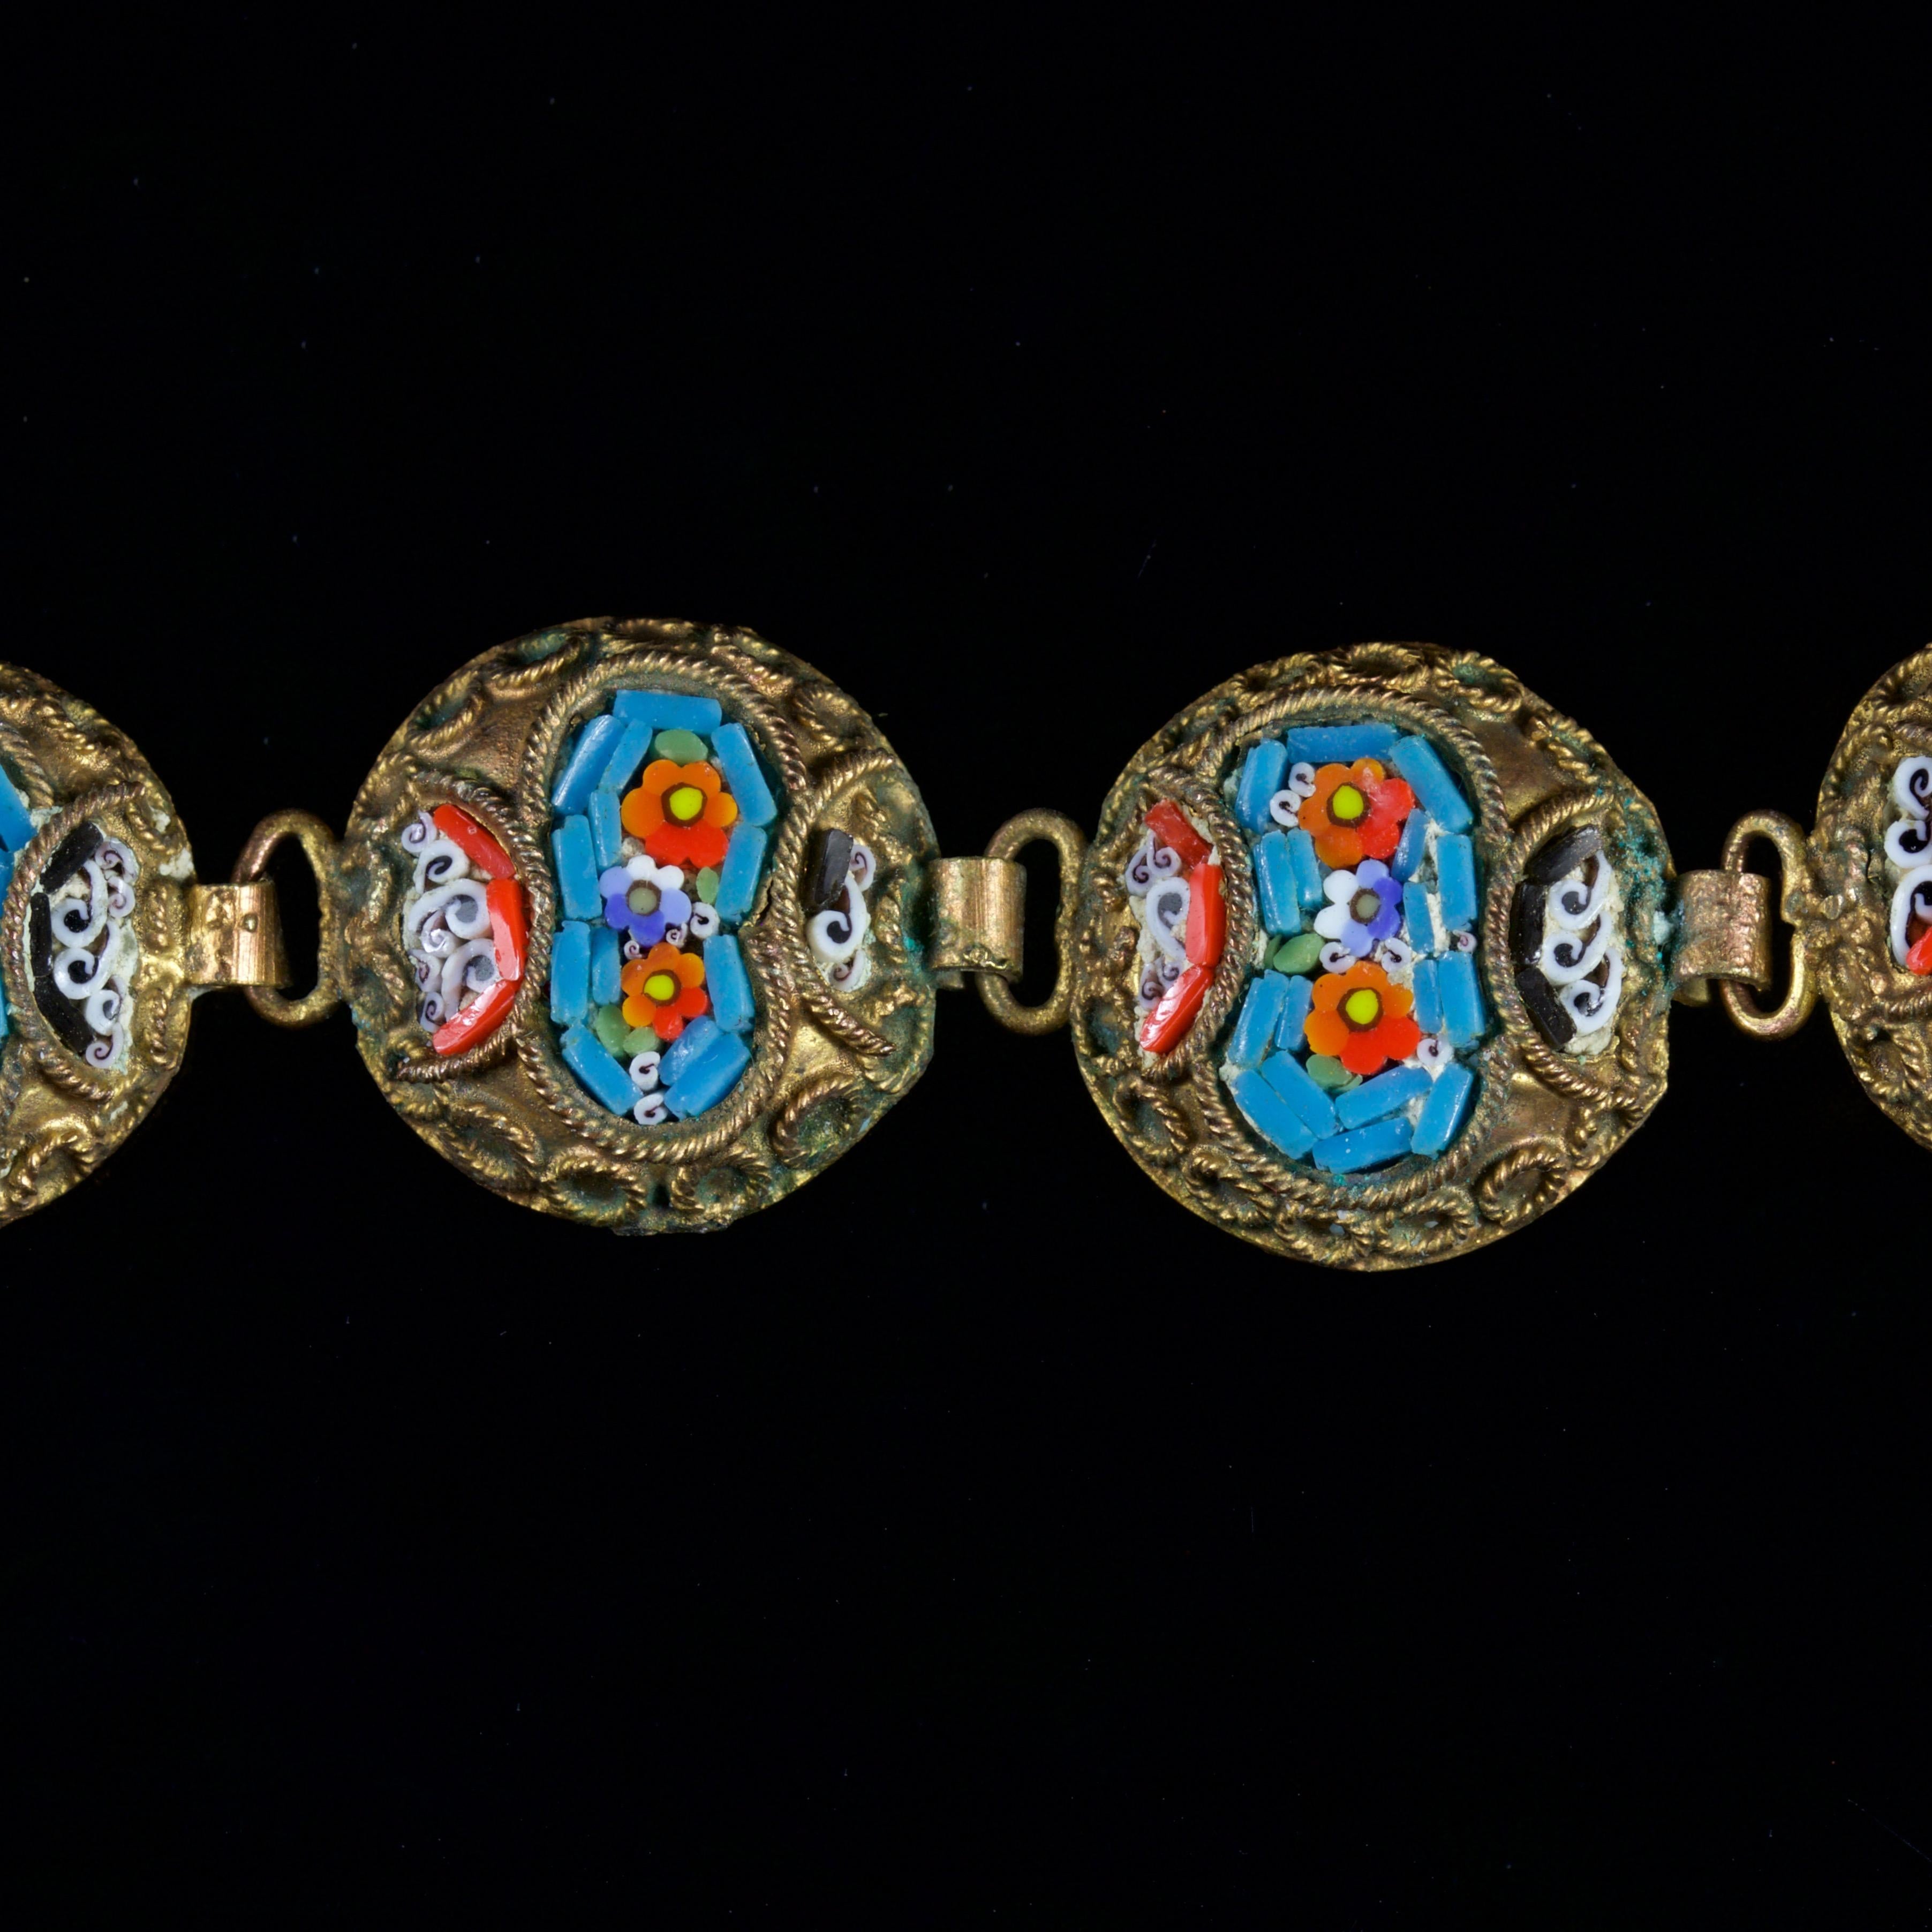 This Victorian Micromosaic bracelet is simply wonderful, Circa 1880.

The bracelet boasts 10 sections showing mosaics of orange and blue flowers with a sky blue background.

At either side of the mosaics, there are two more floral patterns in